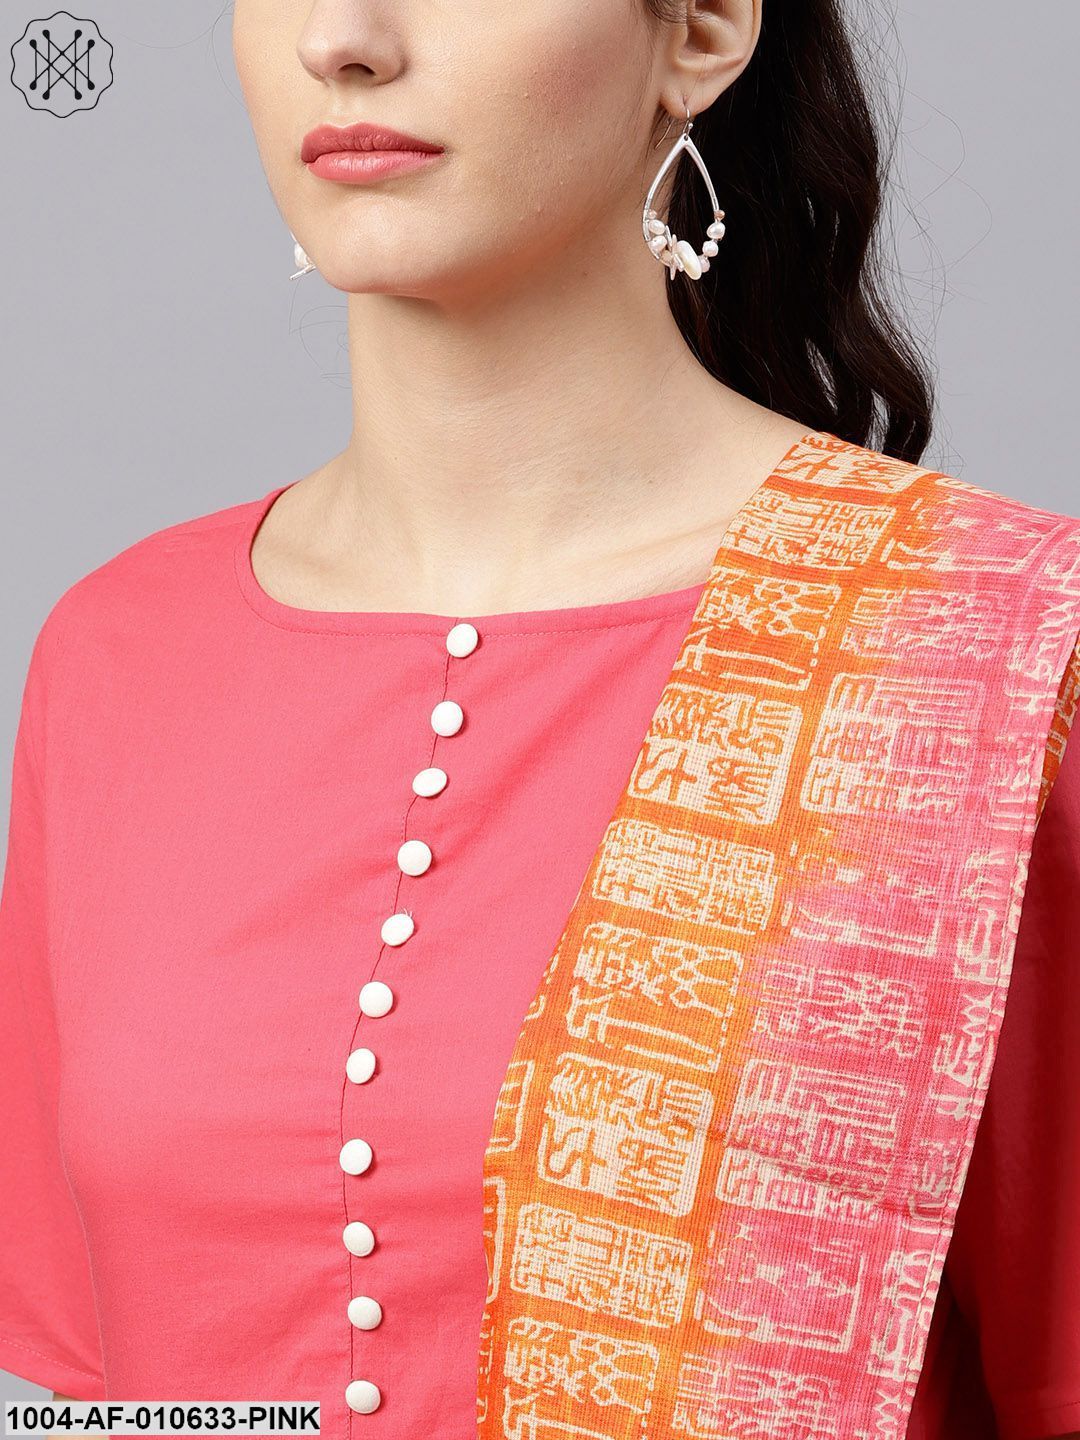 Women Pink Short Sleeves Round Neck A-Line Pure Cotton Kurta And Palazzos With Dupatta Set